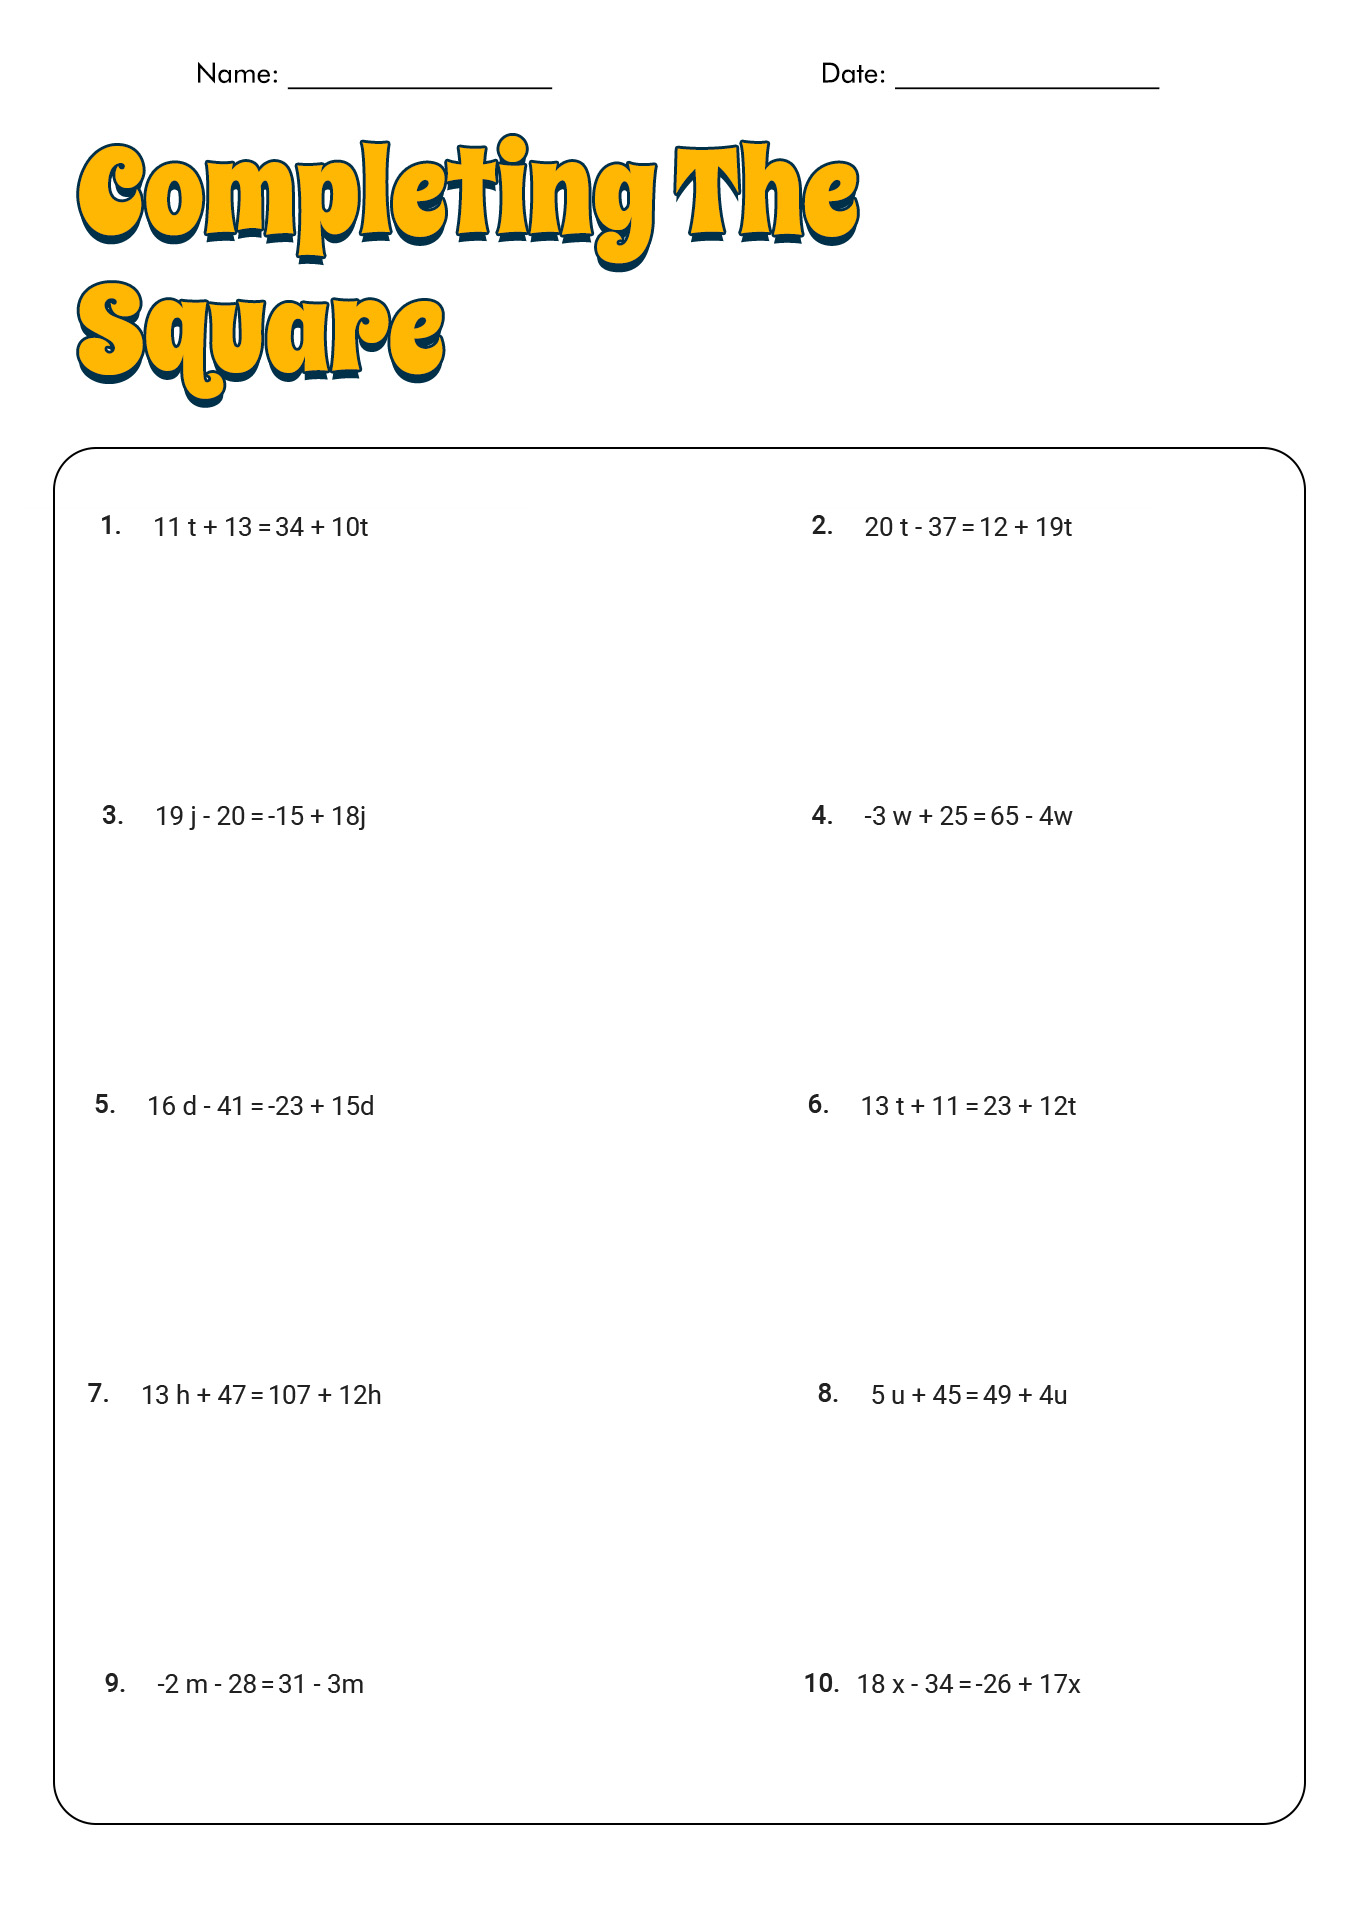 Completing the Square Worksheet Image